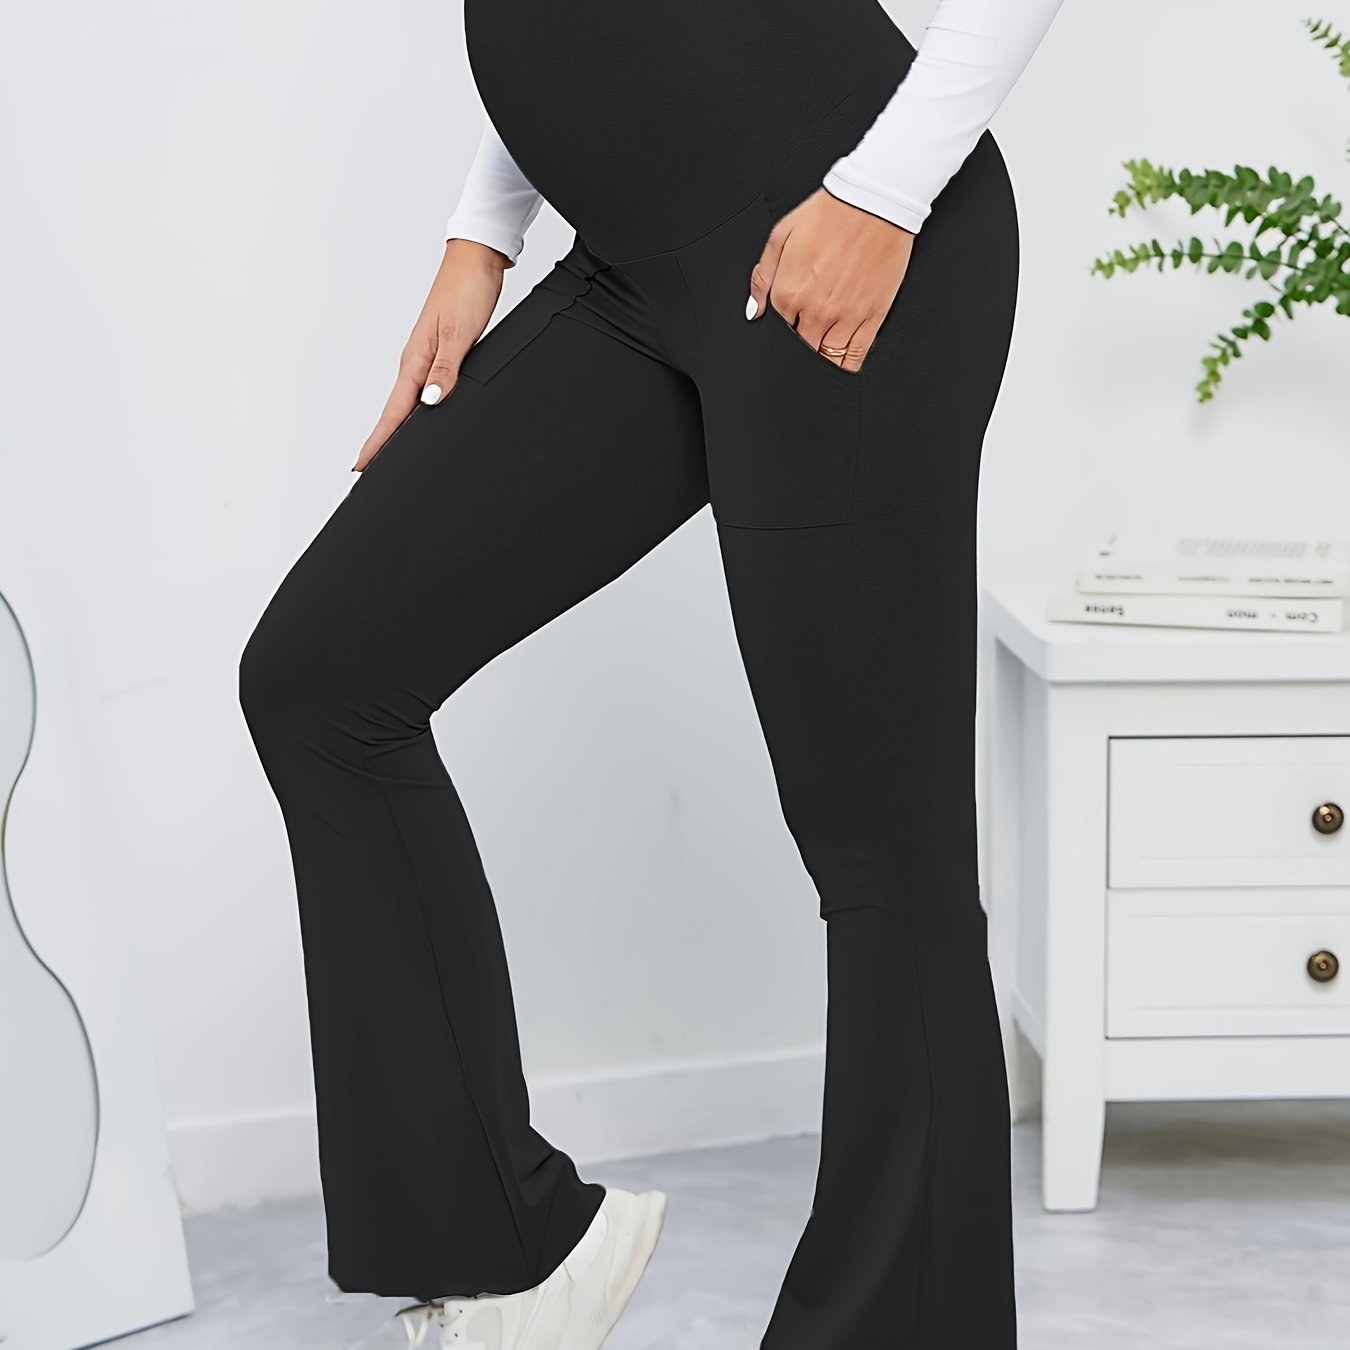 2023 Summer Maternity Flare Pants Pregnancy Low Waist Yoga Sweatpants  Pregnant Woman Belly Trousers Shark Skin Flare Bottoms - AliExpress